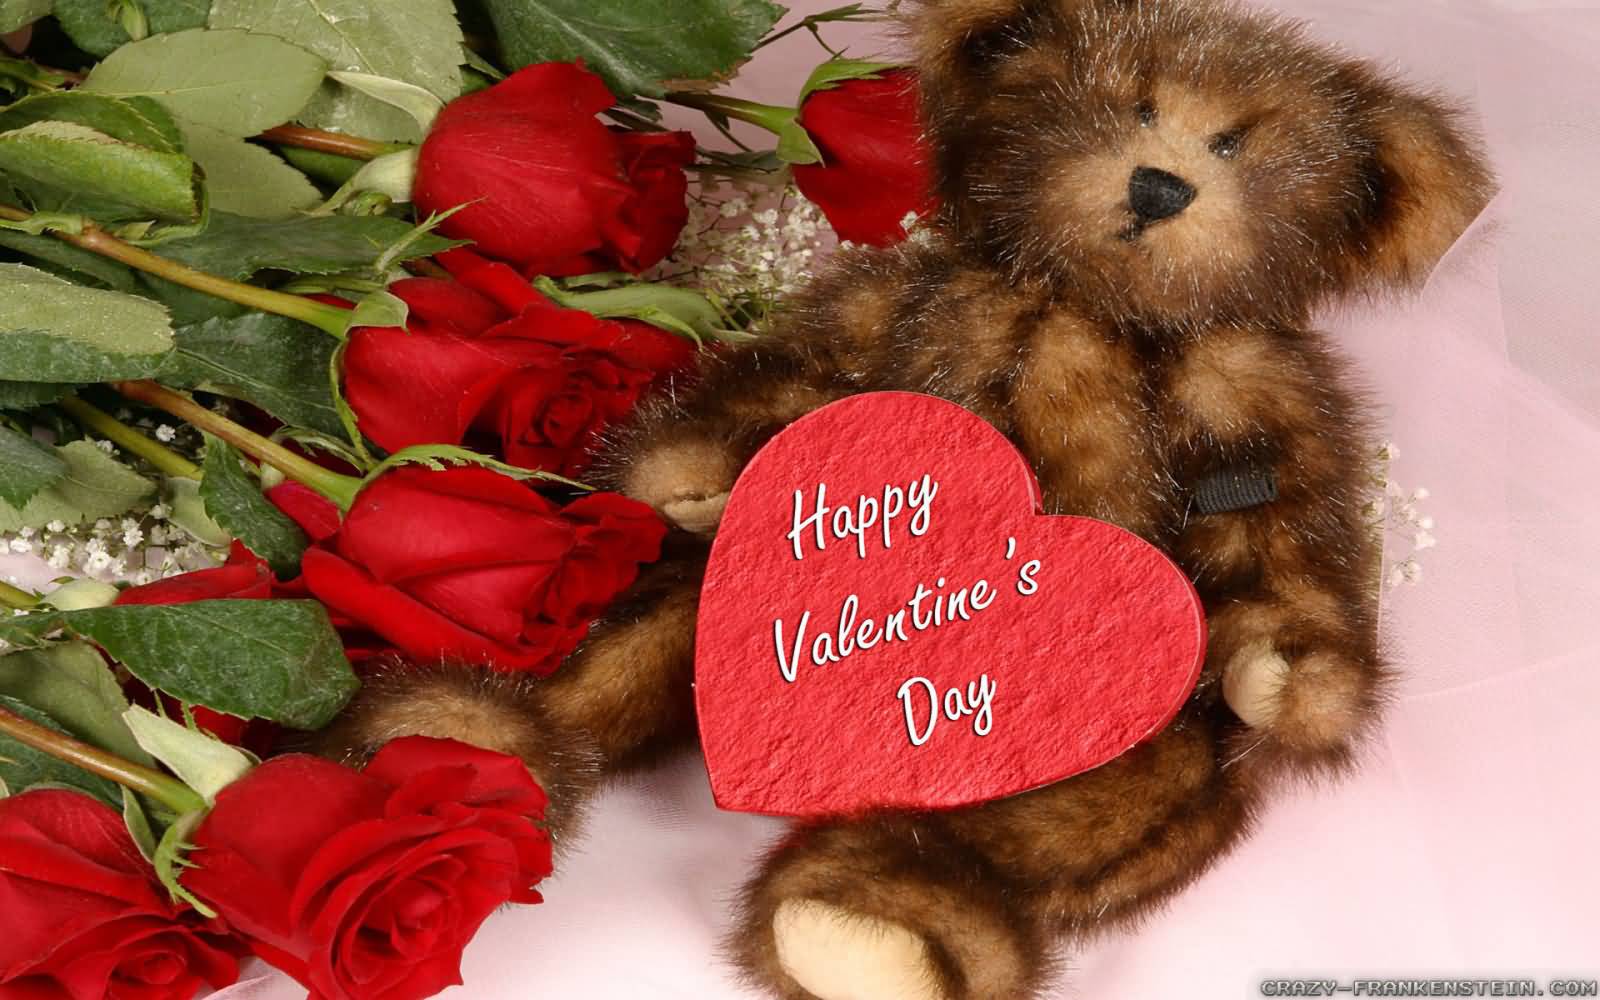 Happy Valentine's Day 2017 Teddy Bear And Rose Flowers